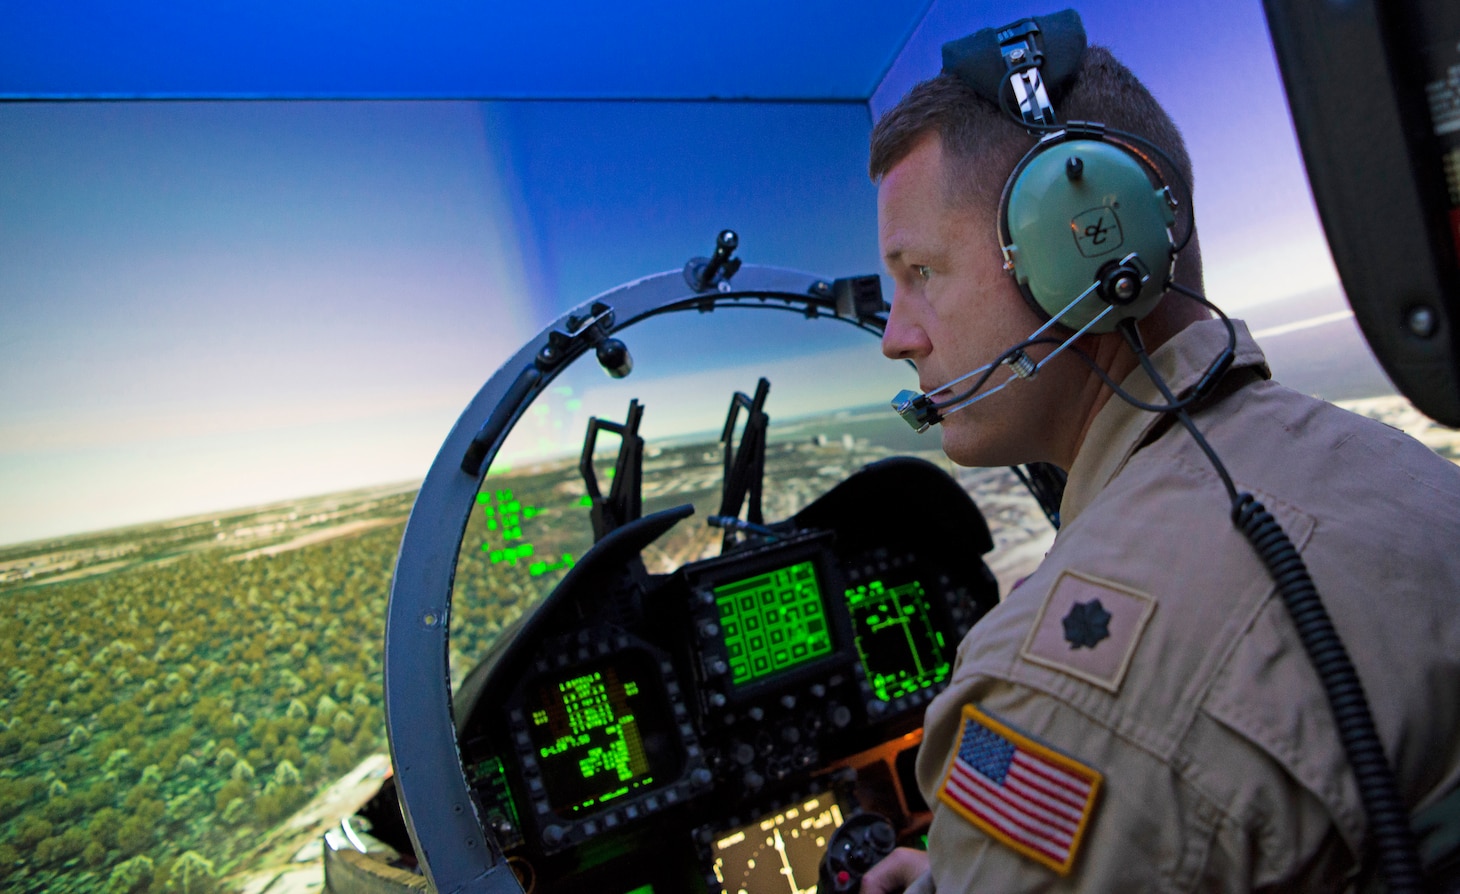 Then Cmdr. Frank Weisser practices solo pilot maneuvers currently performed by the Blue Angels in F/A-18 Hornets in the F/A-18 Super Hornet simulator to understand the differences in how the two aircraft handle. The pilots control the variables in the simulator and then scrutinize the results.